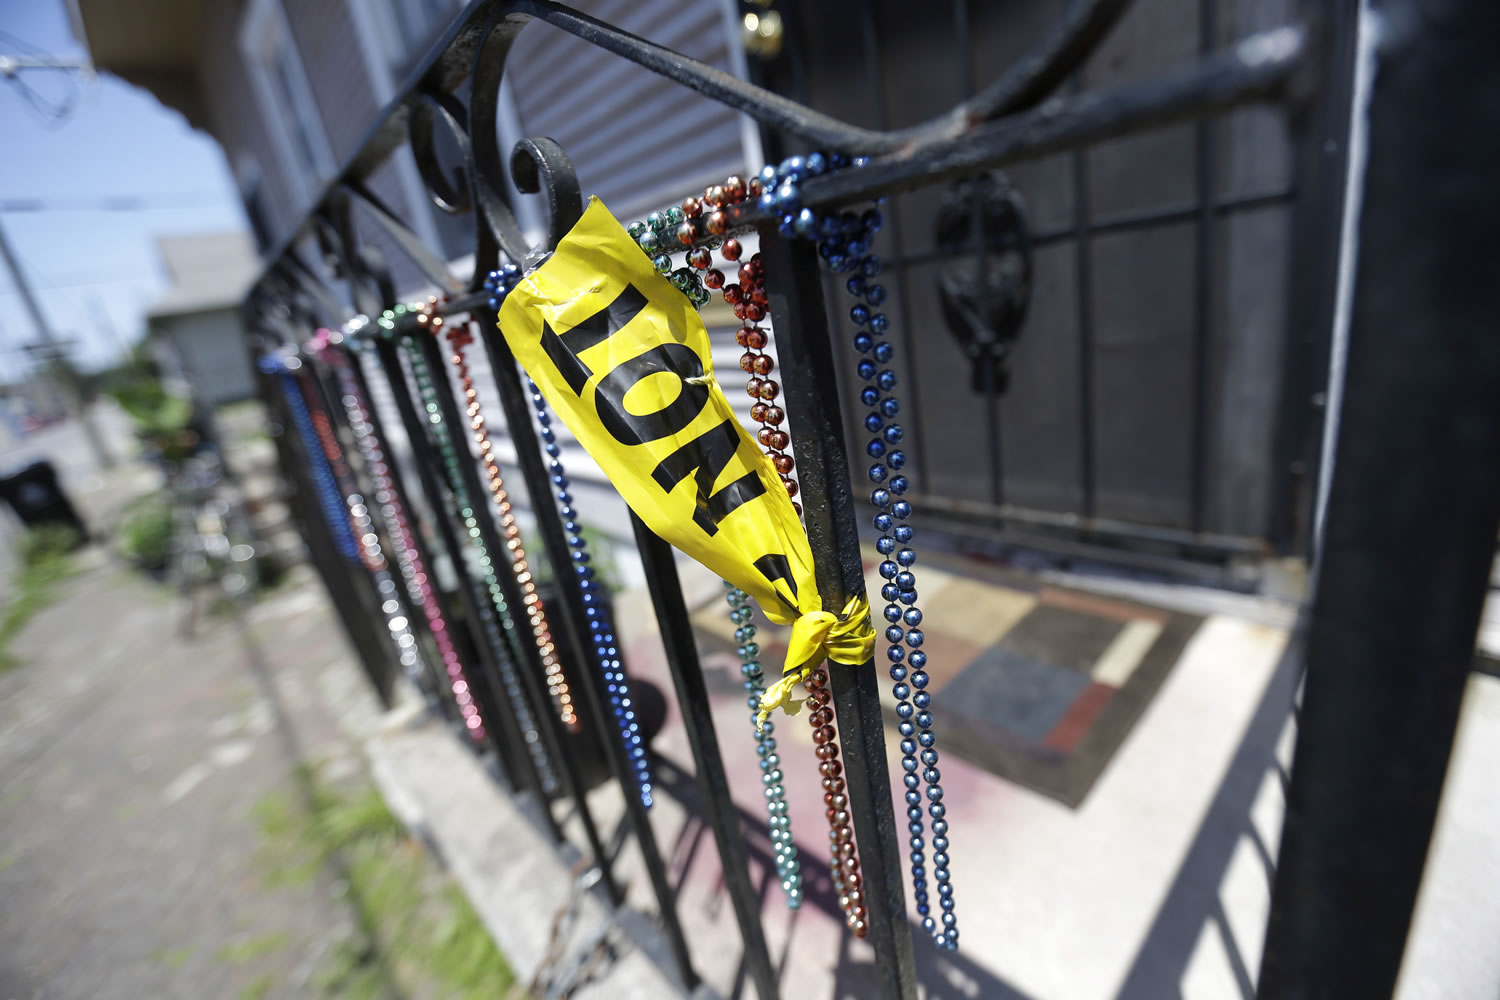 Crime scene tape hangs from a porch, along with Mardi Gras beads, across the street from Sunday's shooting during a second-line parade on Mothers Day in New Orleans.